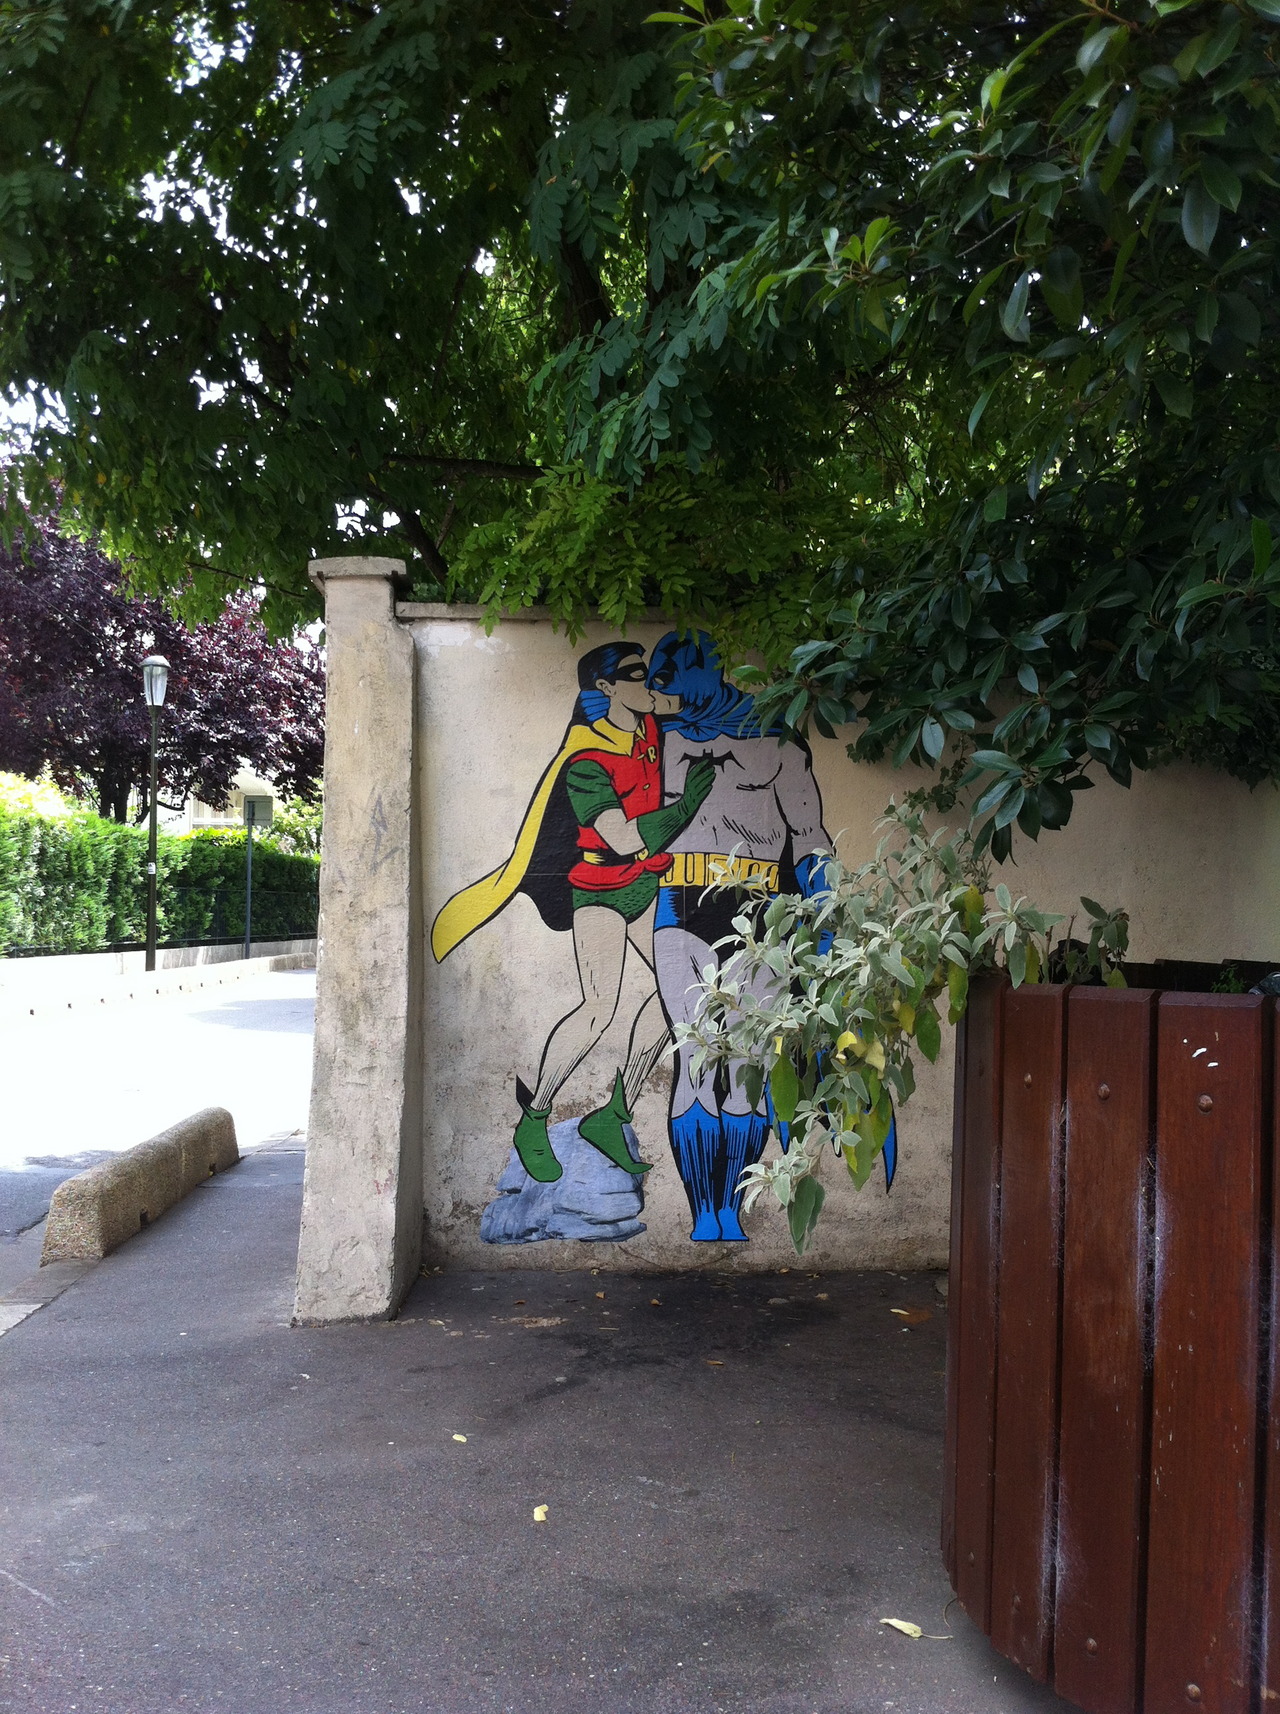 Batman and Robin kissing. By memeIRL in France 2